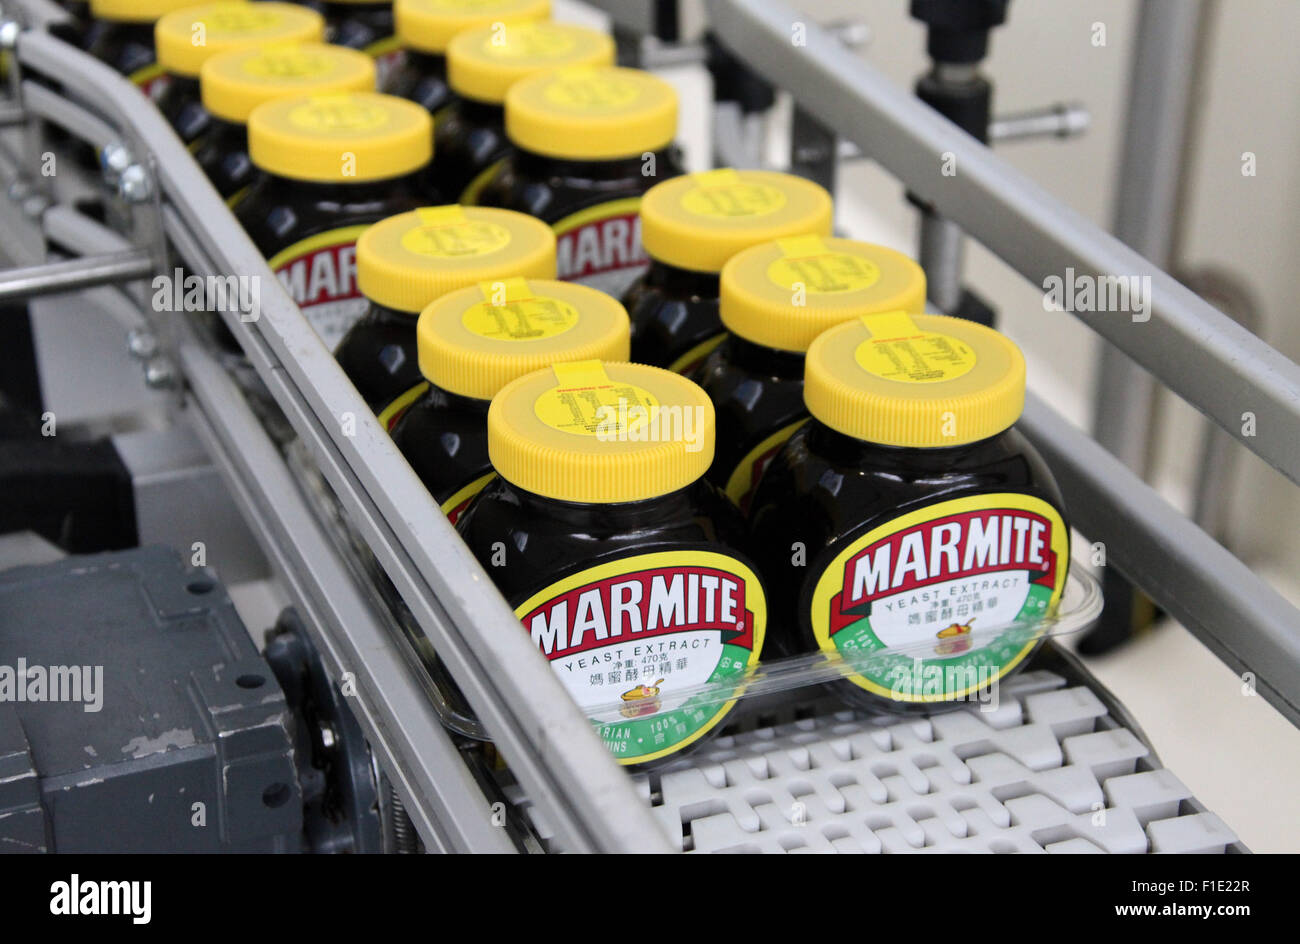 Marmite jars on the production line at the Unilever factory at Burton Stock  Photo - Alamy